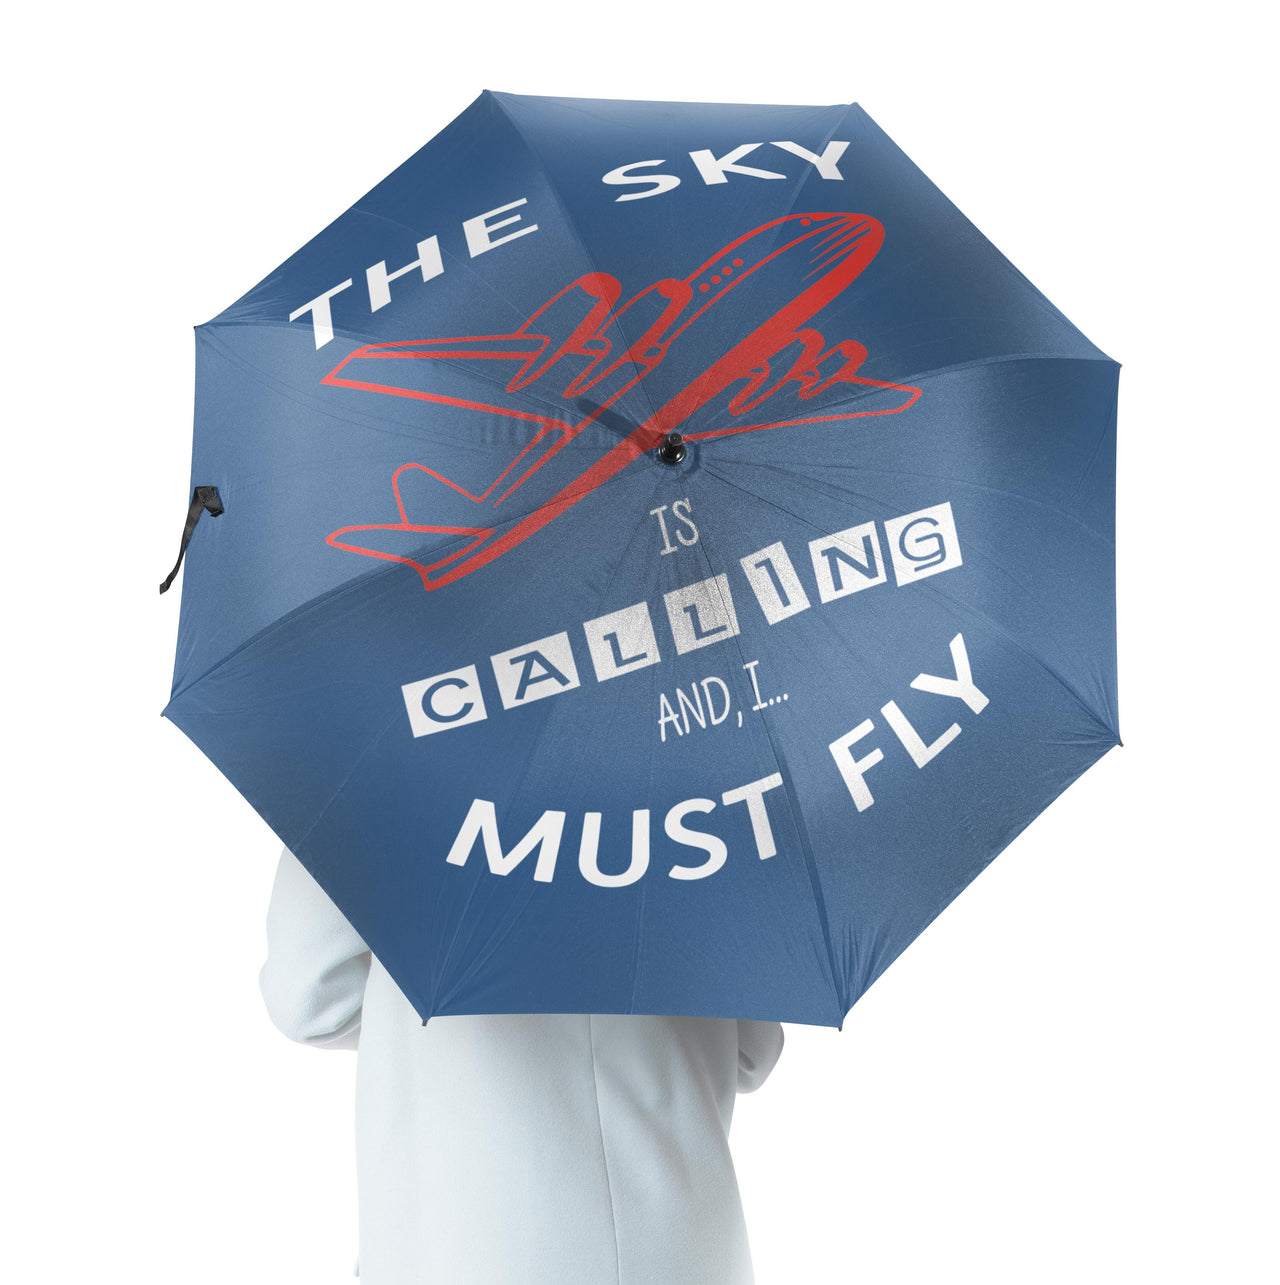 The Sky is Calling and I Must Fly Designed Umbrella